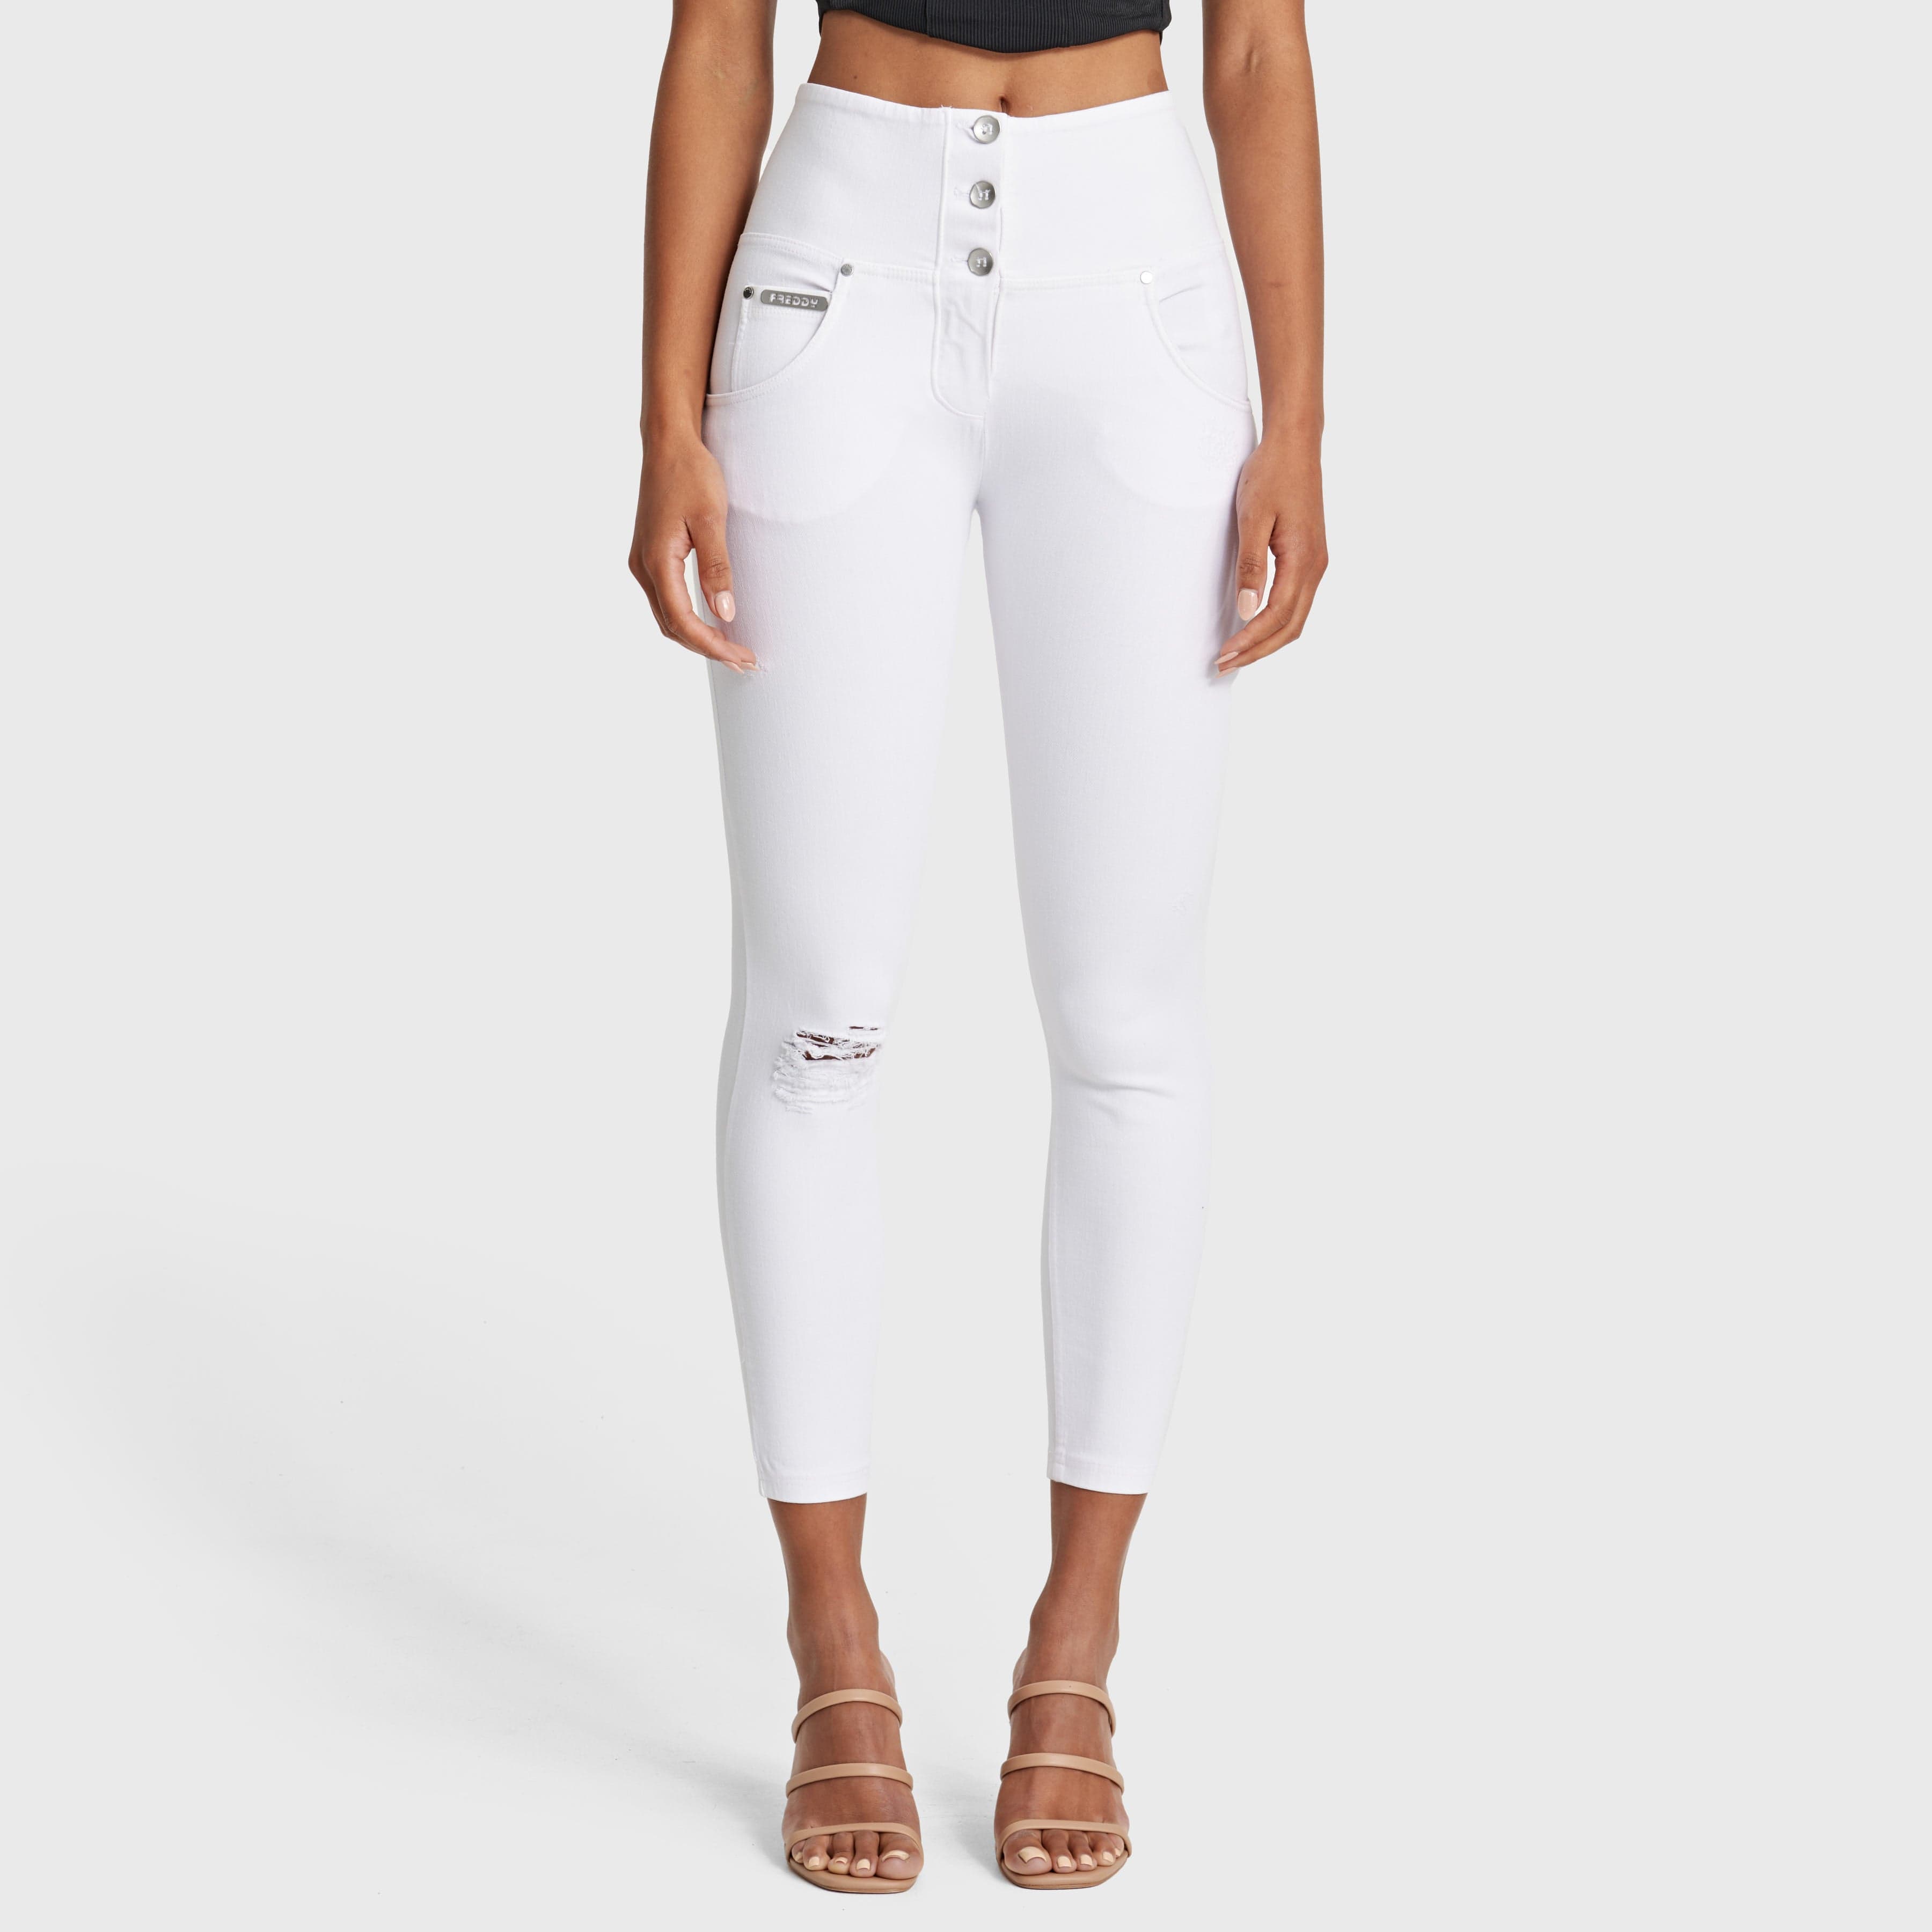 WR.UP® Snug Distressed Jeans - High Waisted - 7/8 Length - White 1